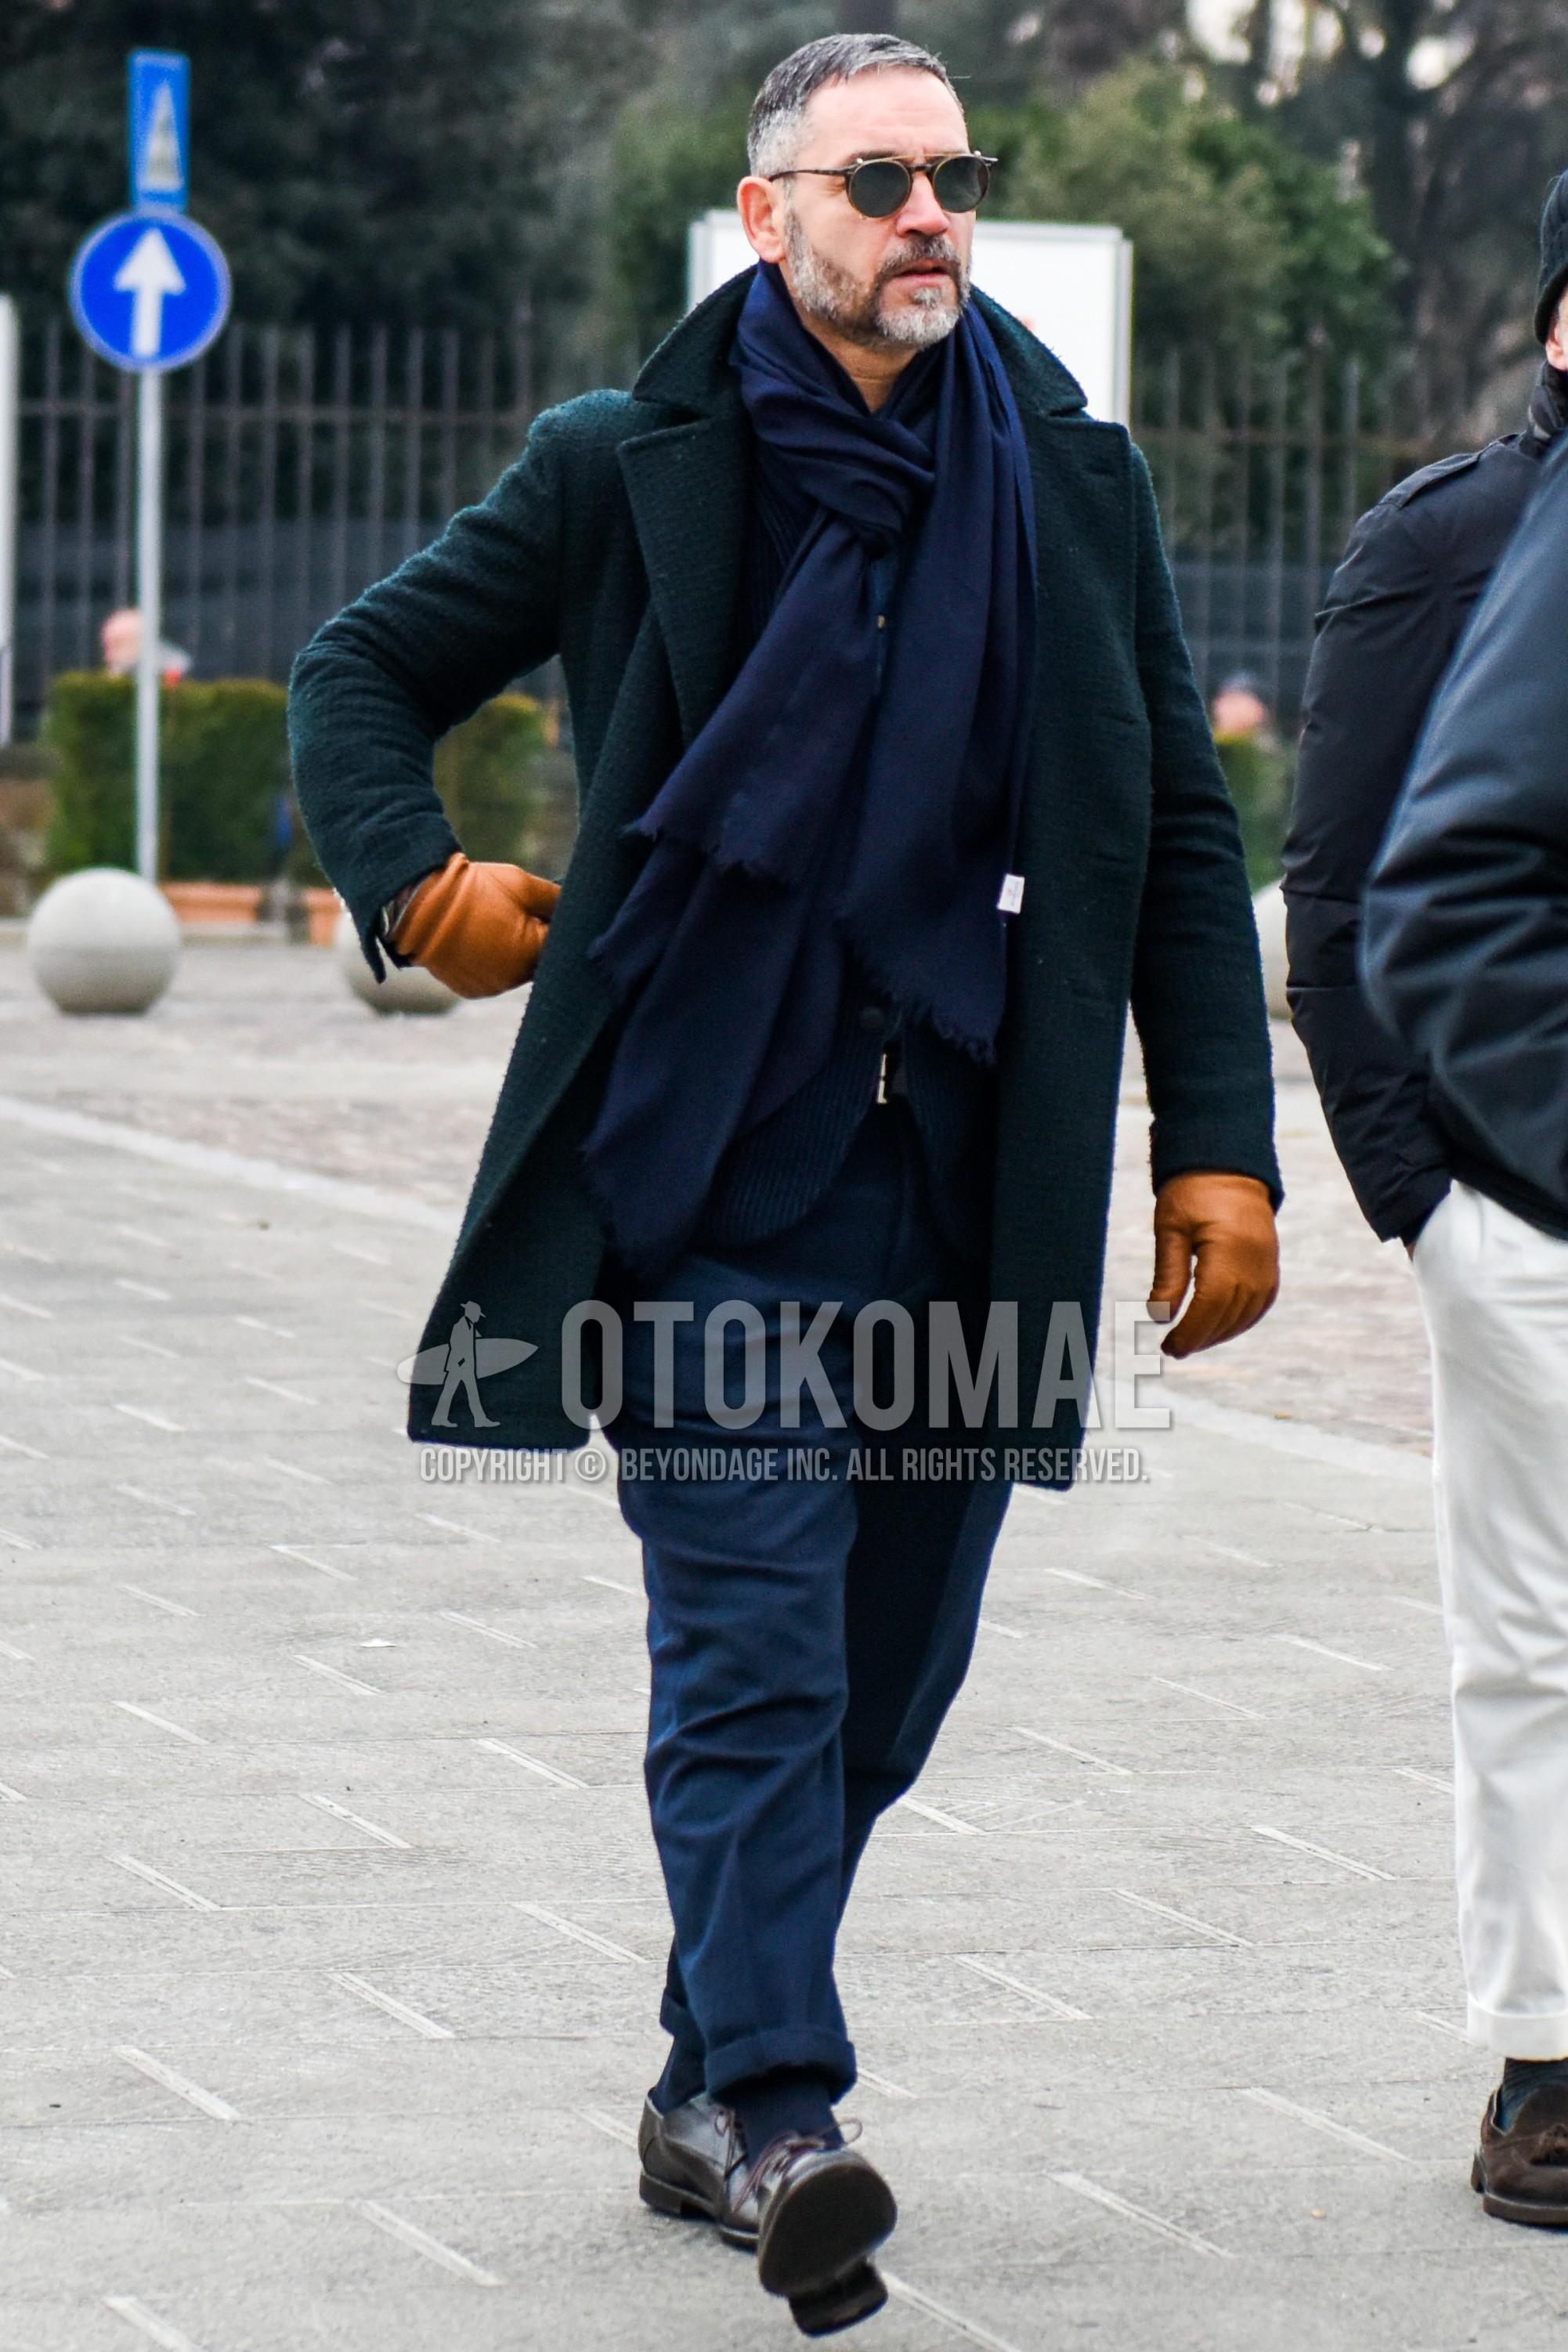 Men's autumn winter outfit with black plain sunglasses, navy plain scarf, green check ulster coat, navy stripes tailored jacket, navy plain bottoms, navy plain socks, brown plain toe leather shoes.